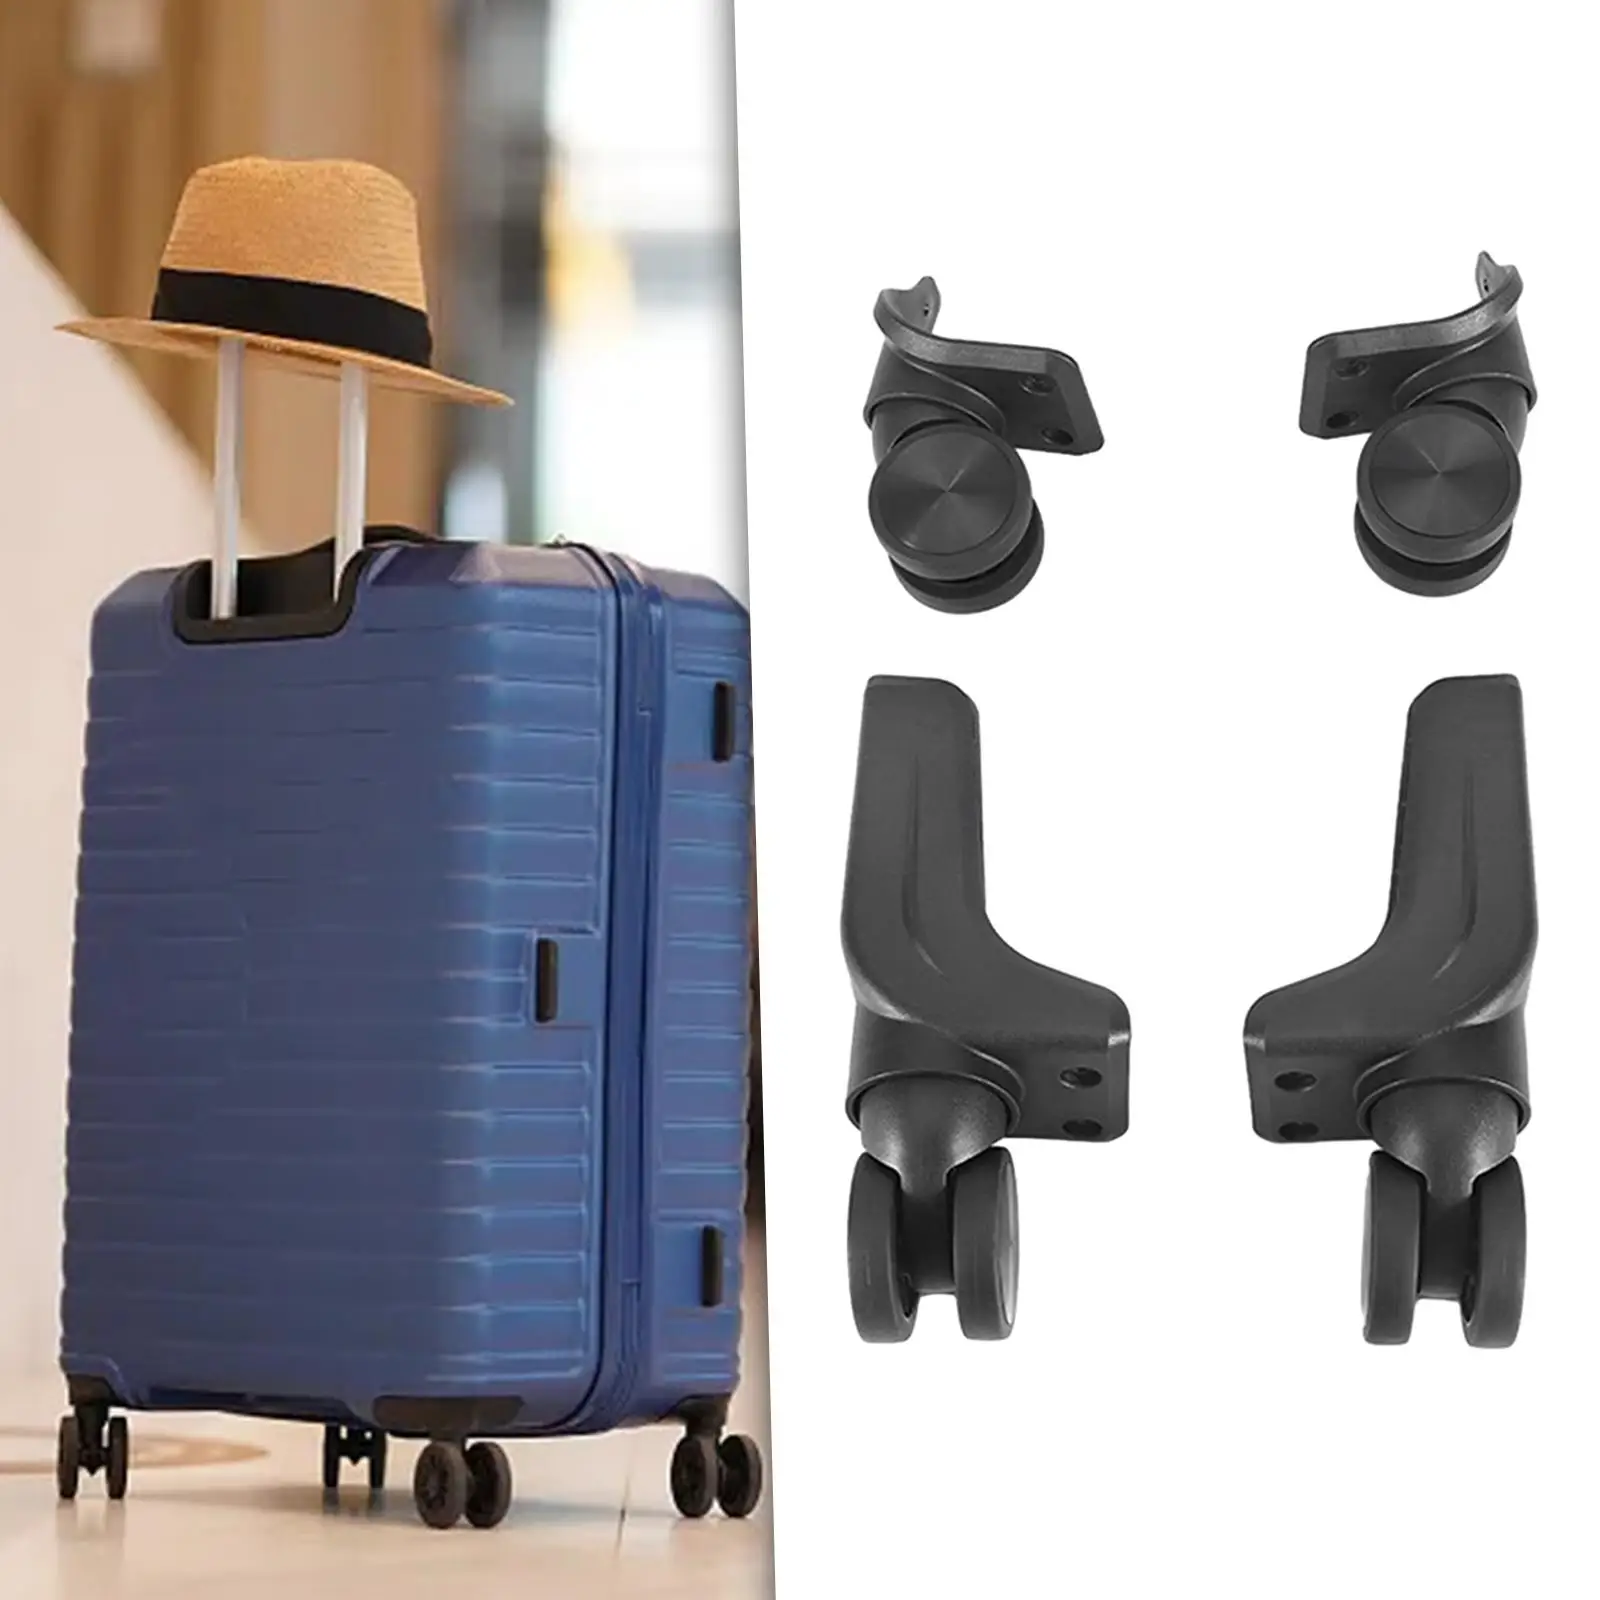 4 Pieces Replacement Luggage Suitcase Wheels Black Flexible Luggage Accessories Swivel Wheels Replacement Suitcase Caster Wheels